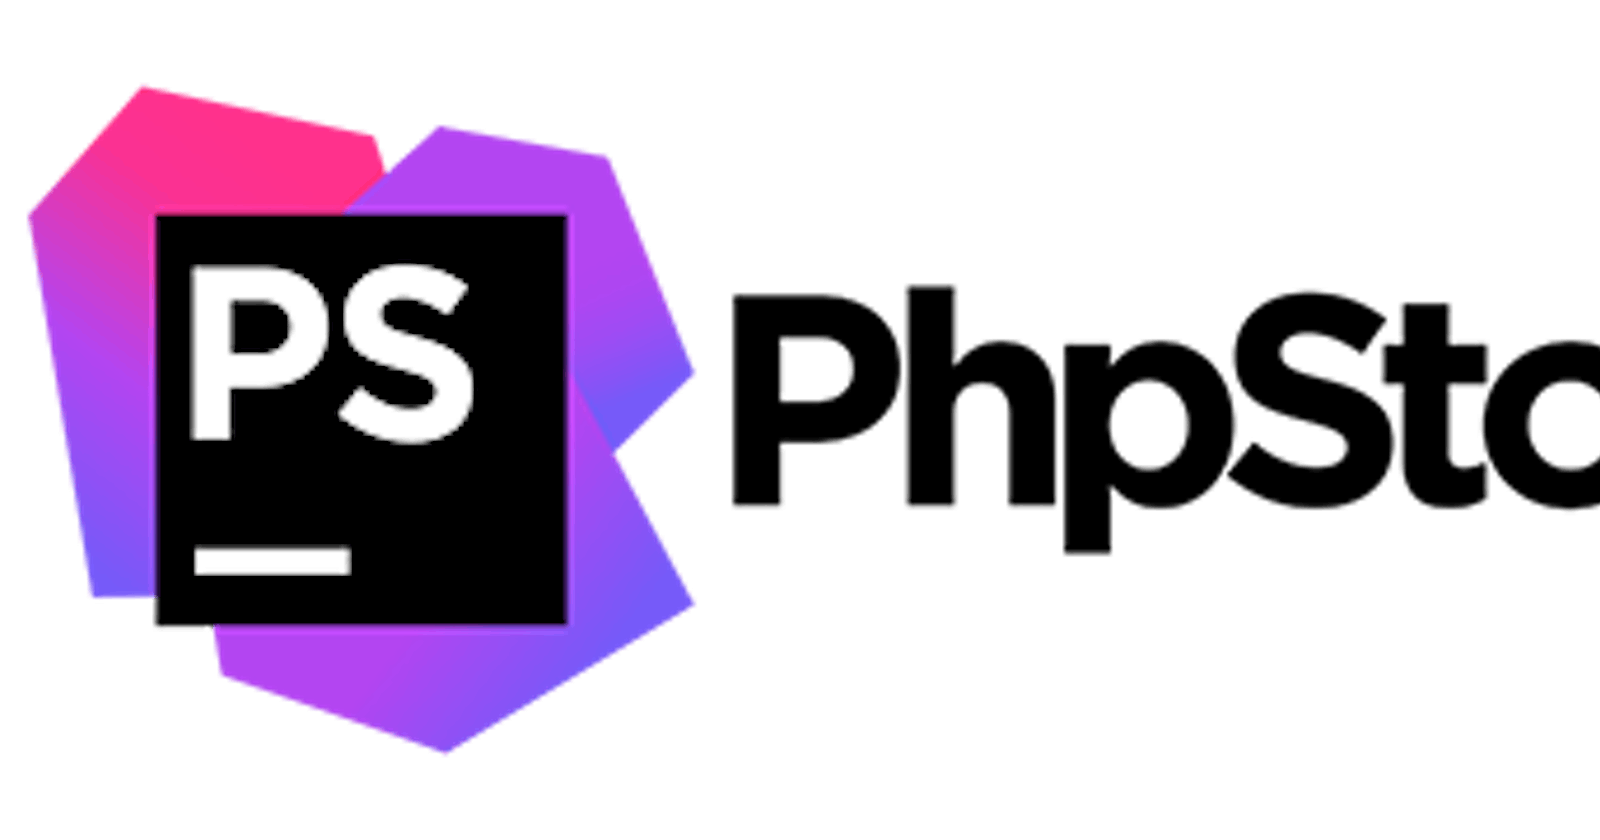 How to work in remote server with PhpStorm.